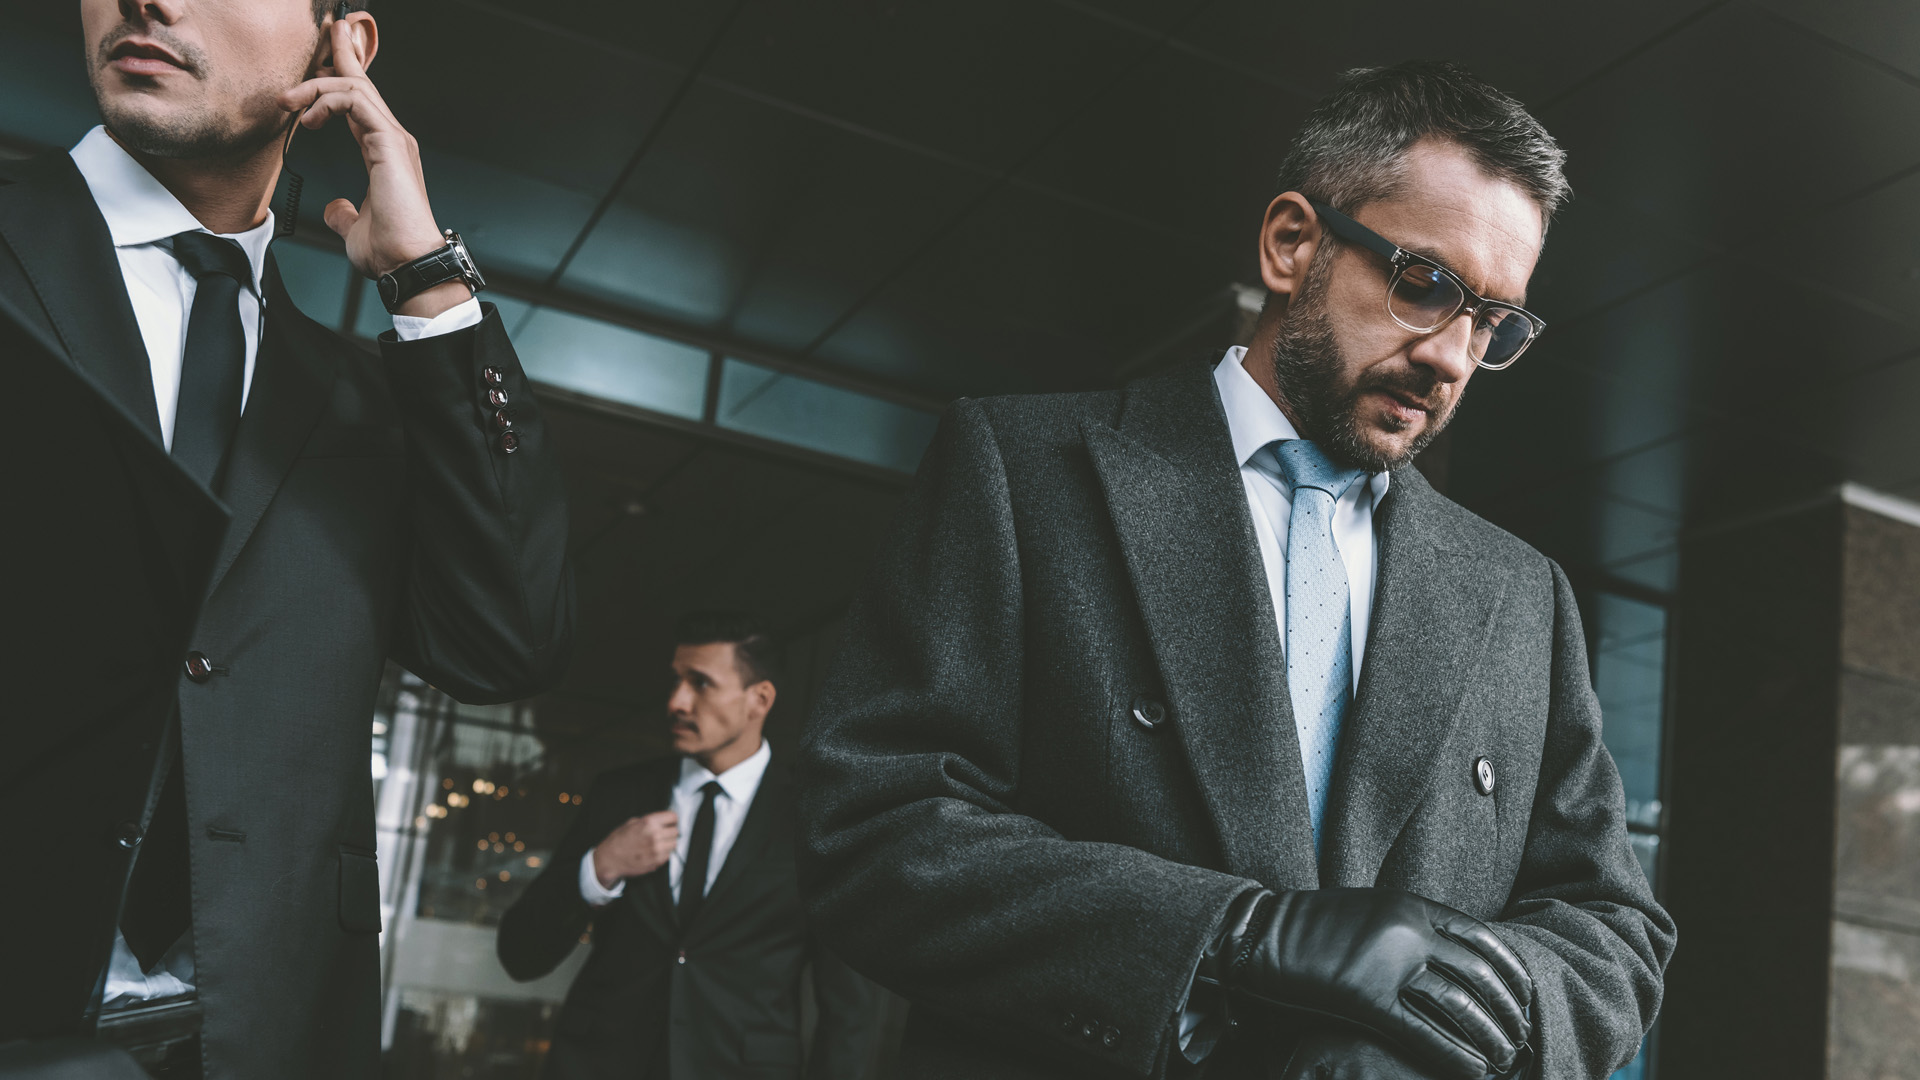 Psychology of a Close Protection Operative